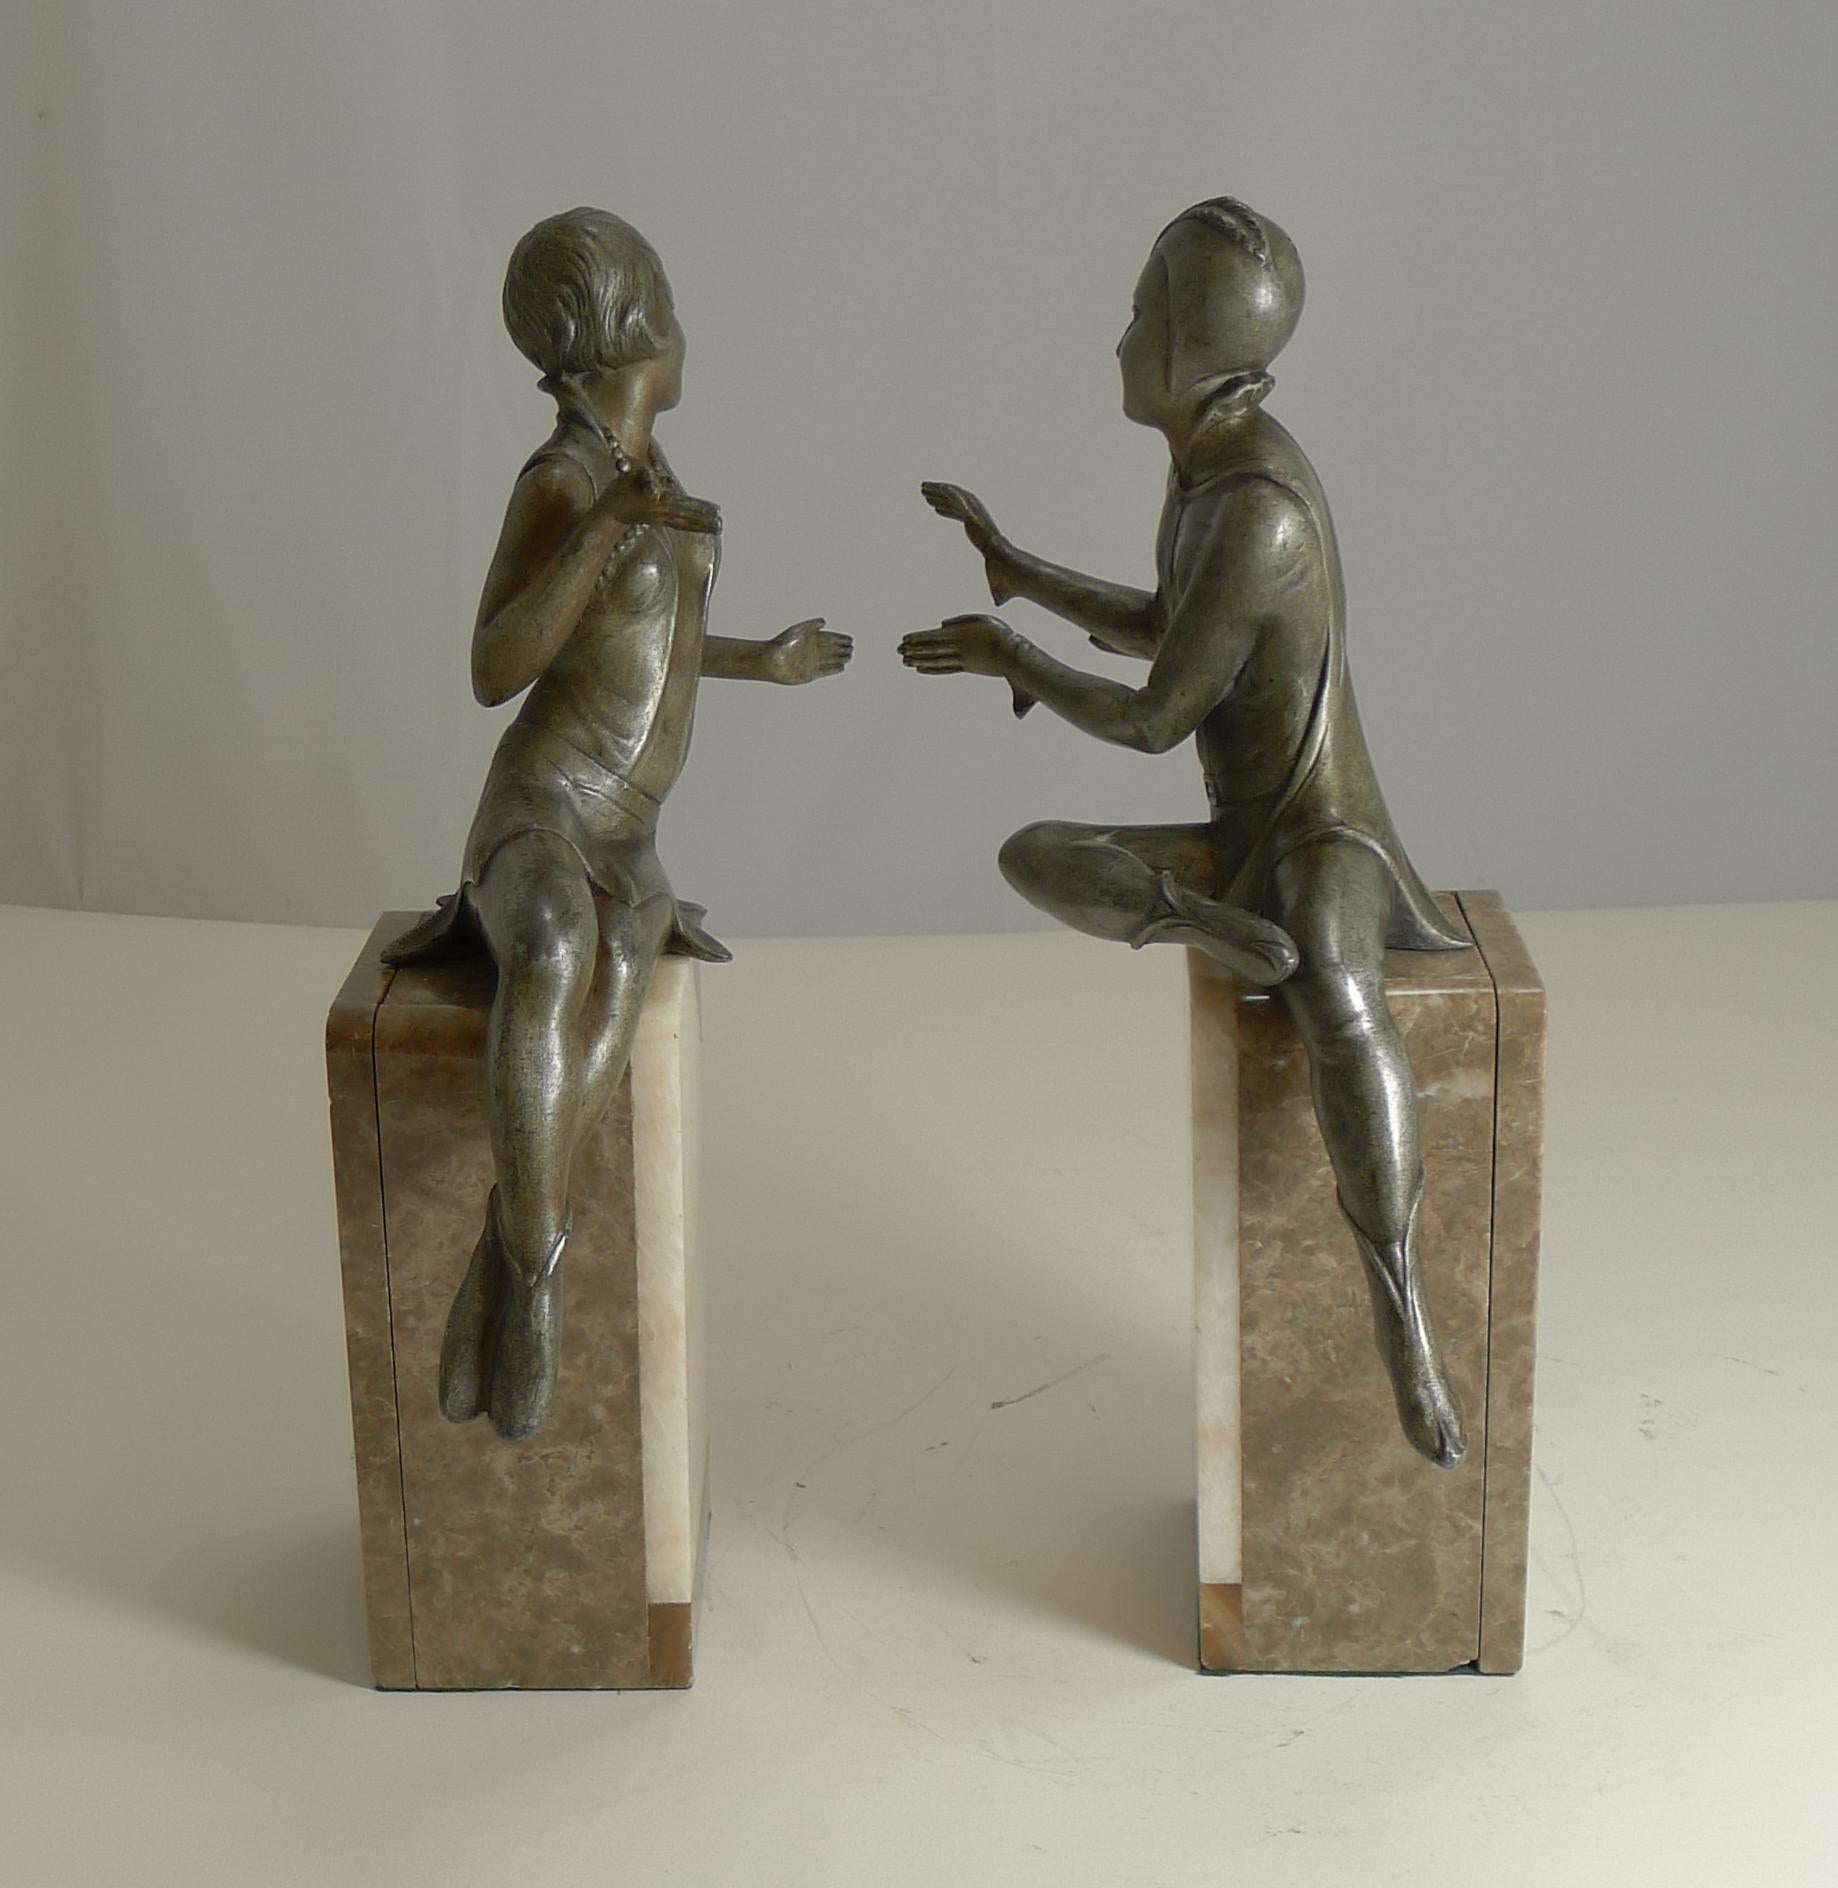 Metal Stylish Pair of Art Deco Figures Signed Salvado, France, circa 1920 / Bookends